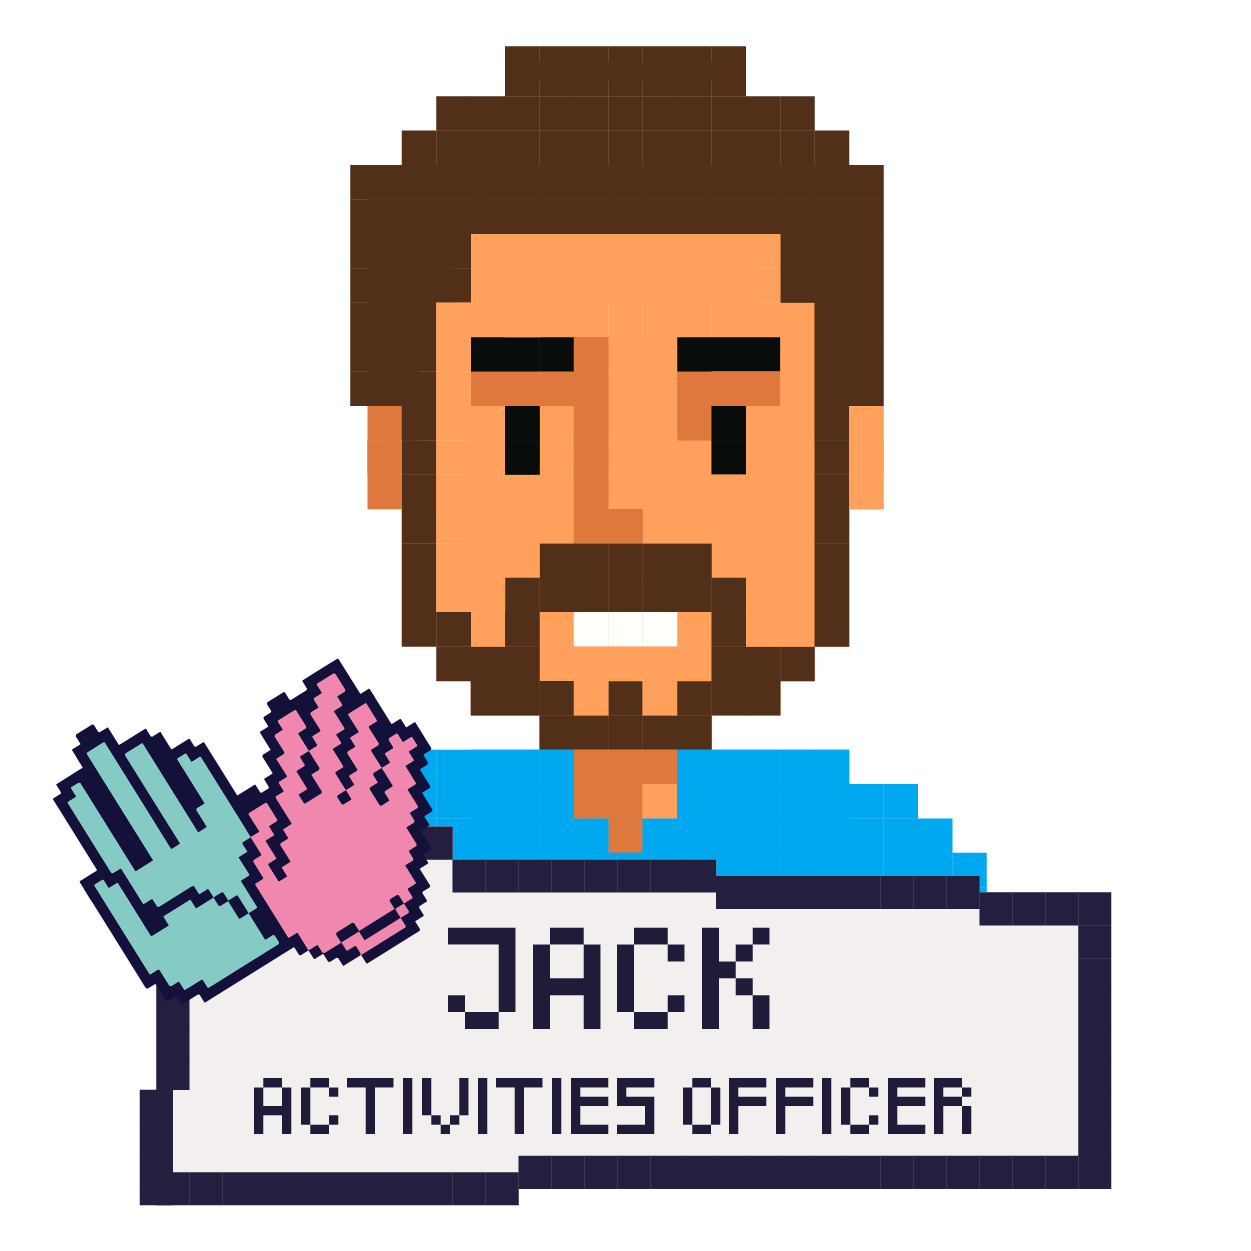 Image of Jack McDonald, Activities Officer he/him - click to view his profile